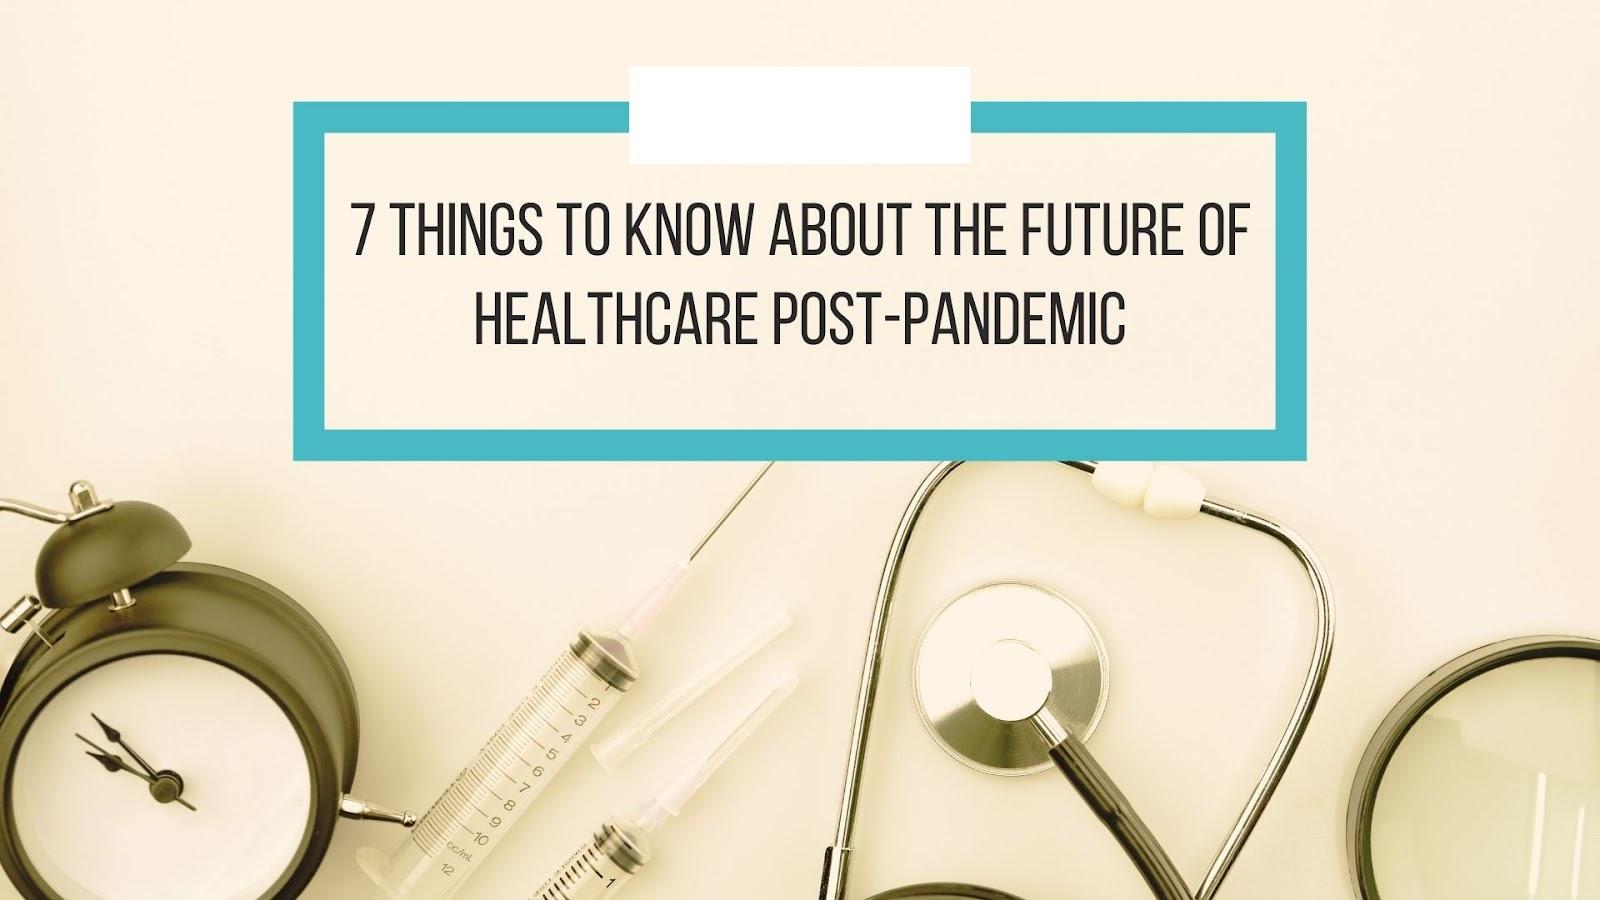 Healthcare Post-Pandemic